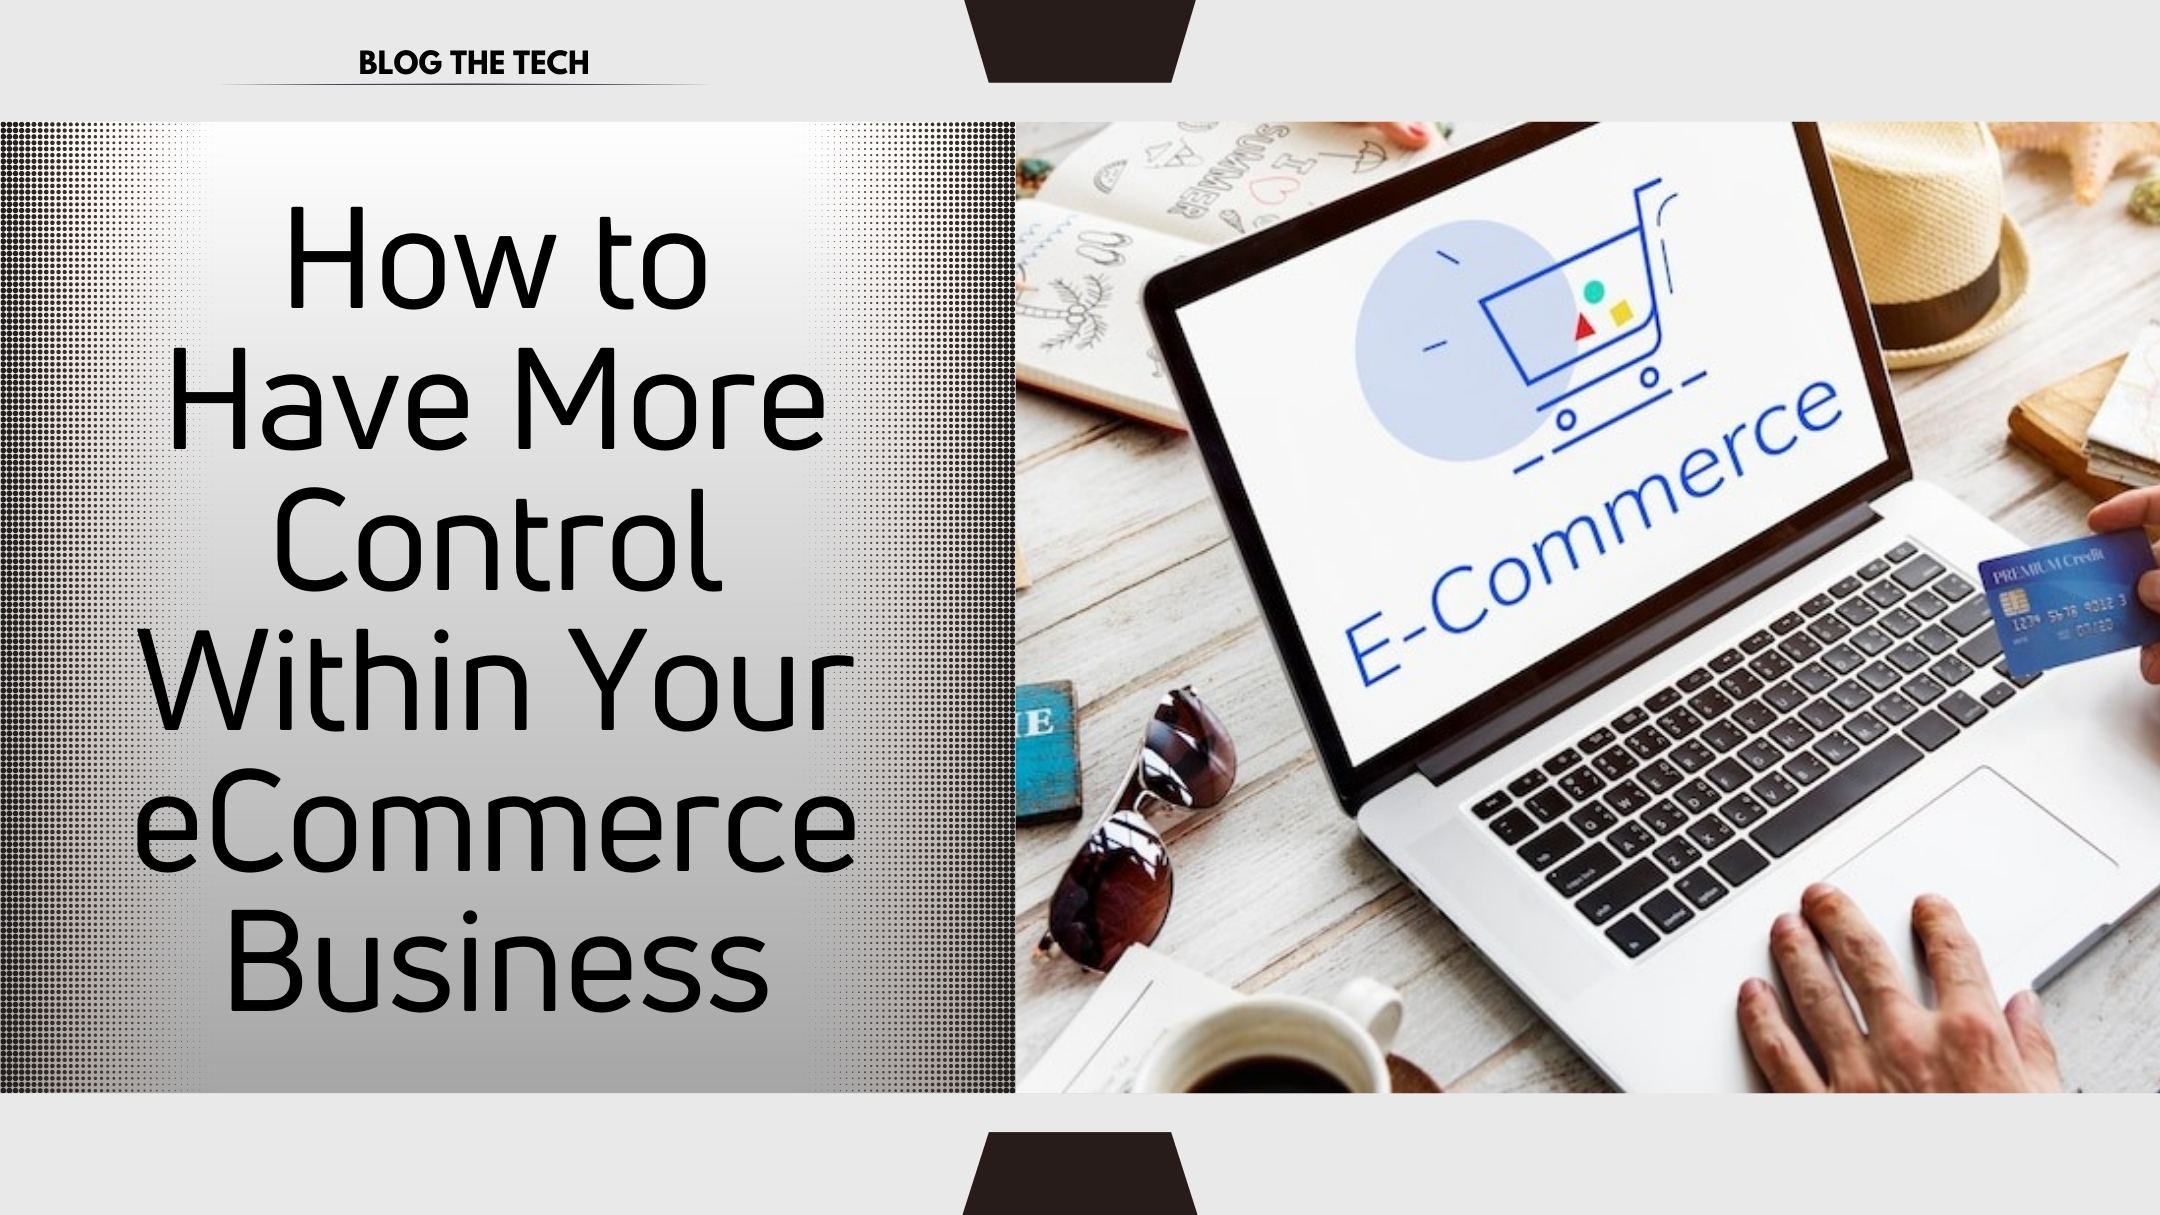 have-more-control-within-your-ecommerce-business-featured